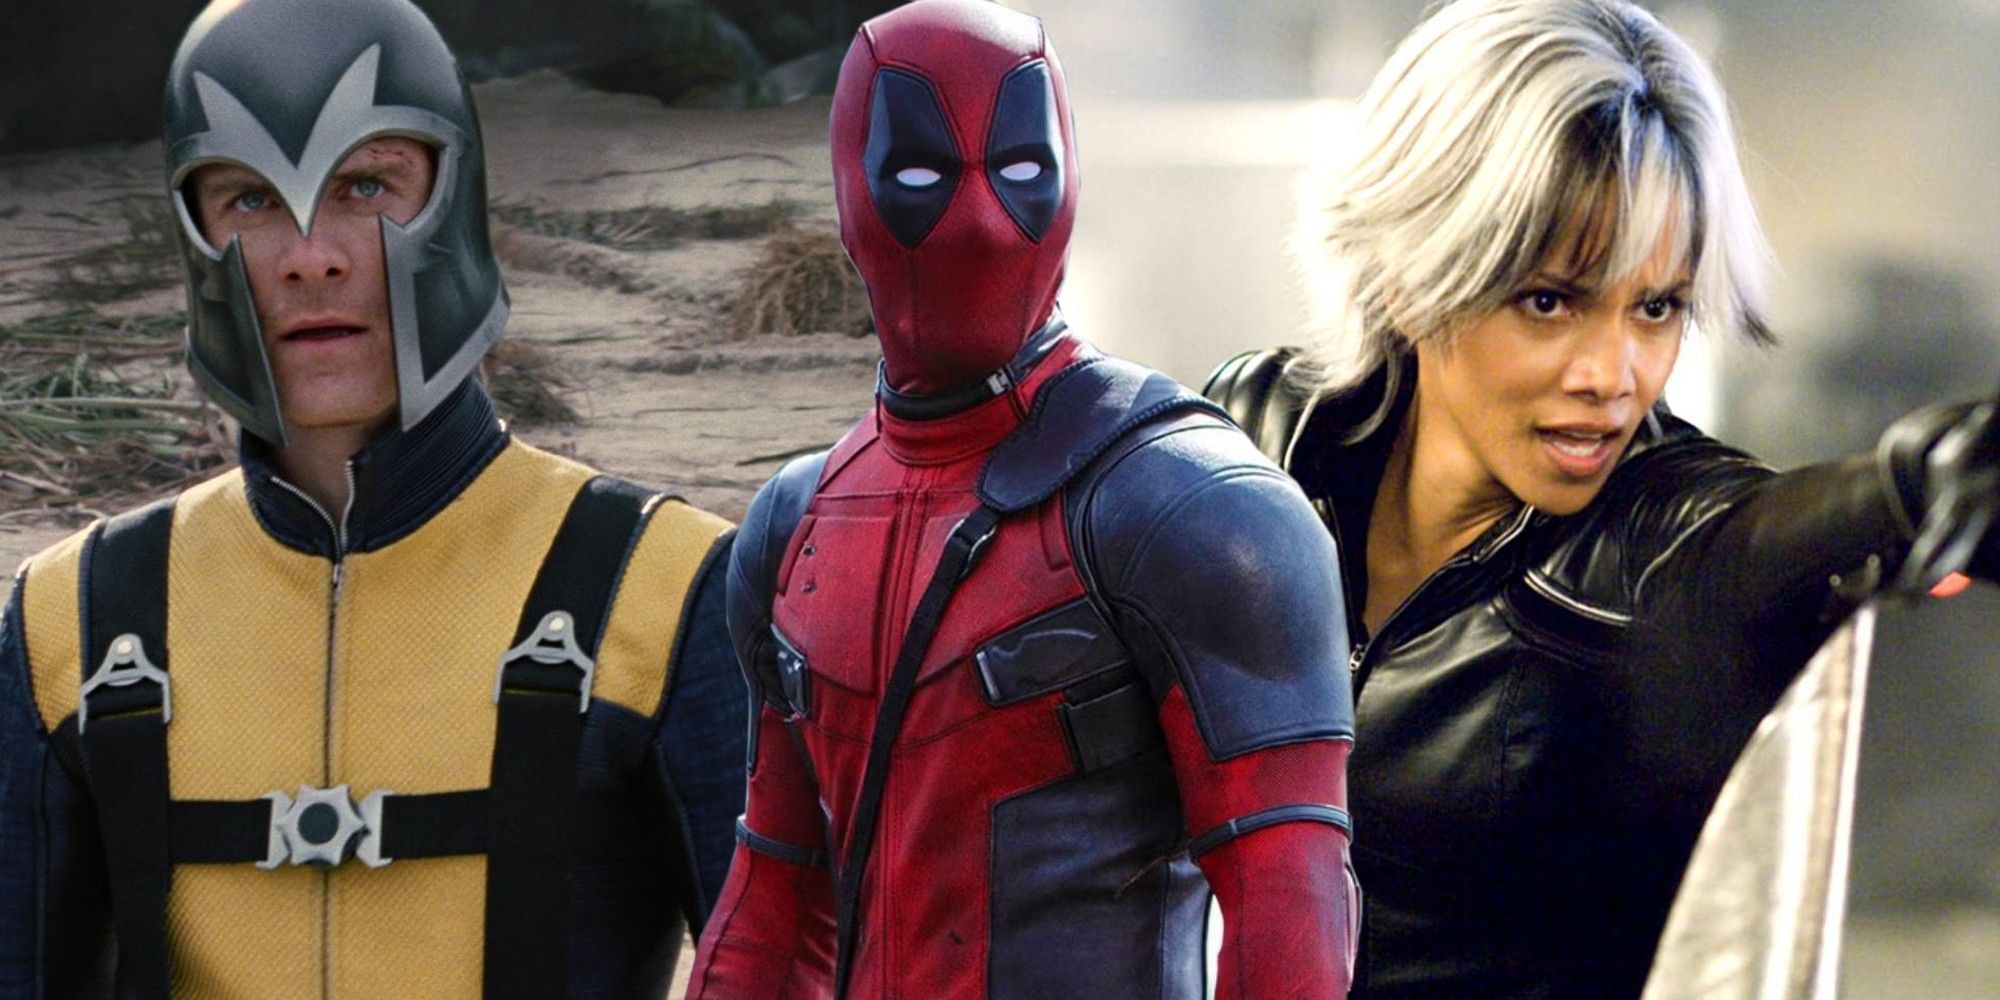 A split image of Deadpool flanked by Magneto and Storm in various X-Men movies